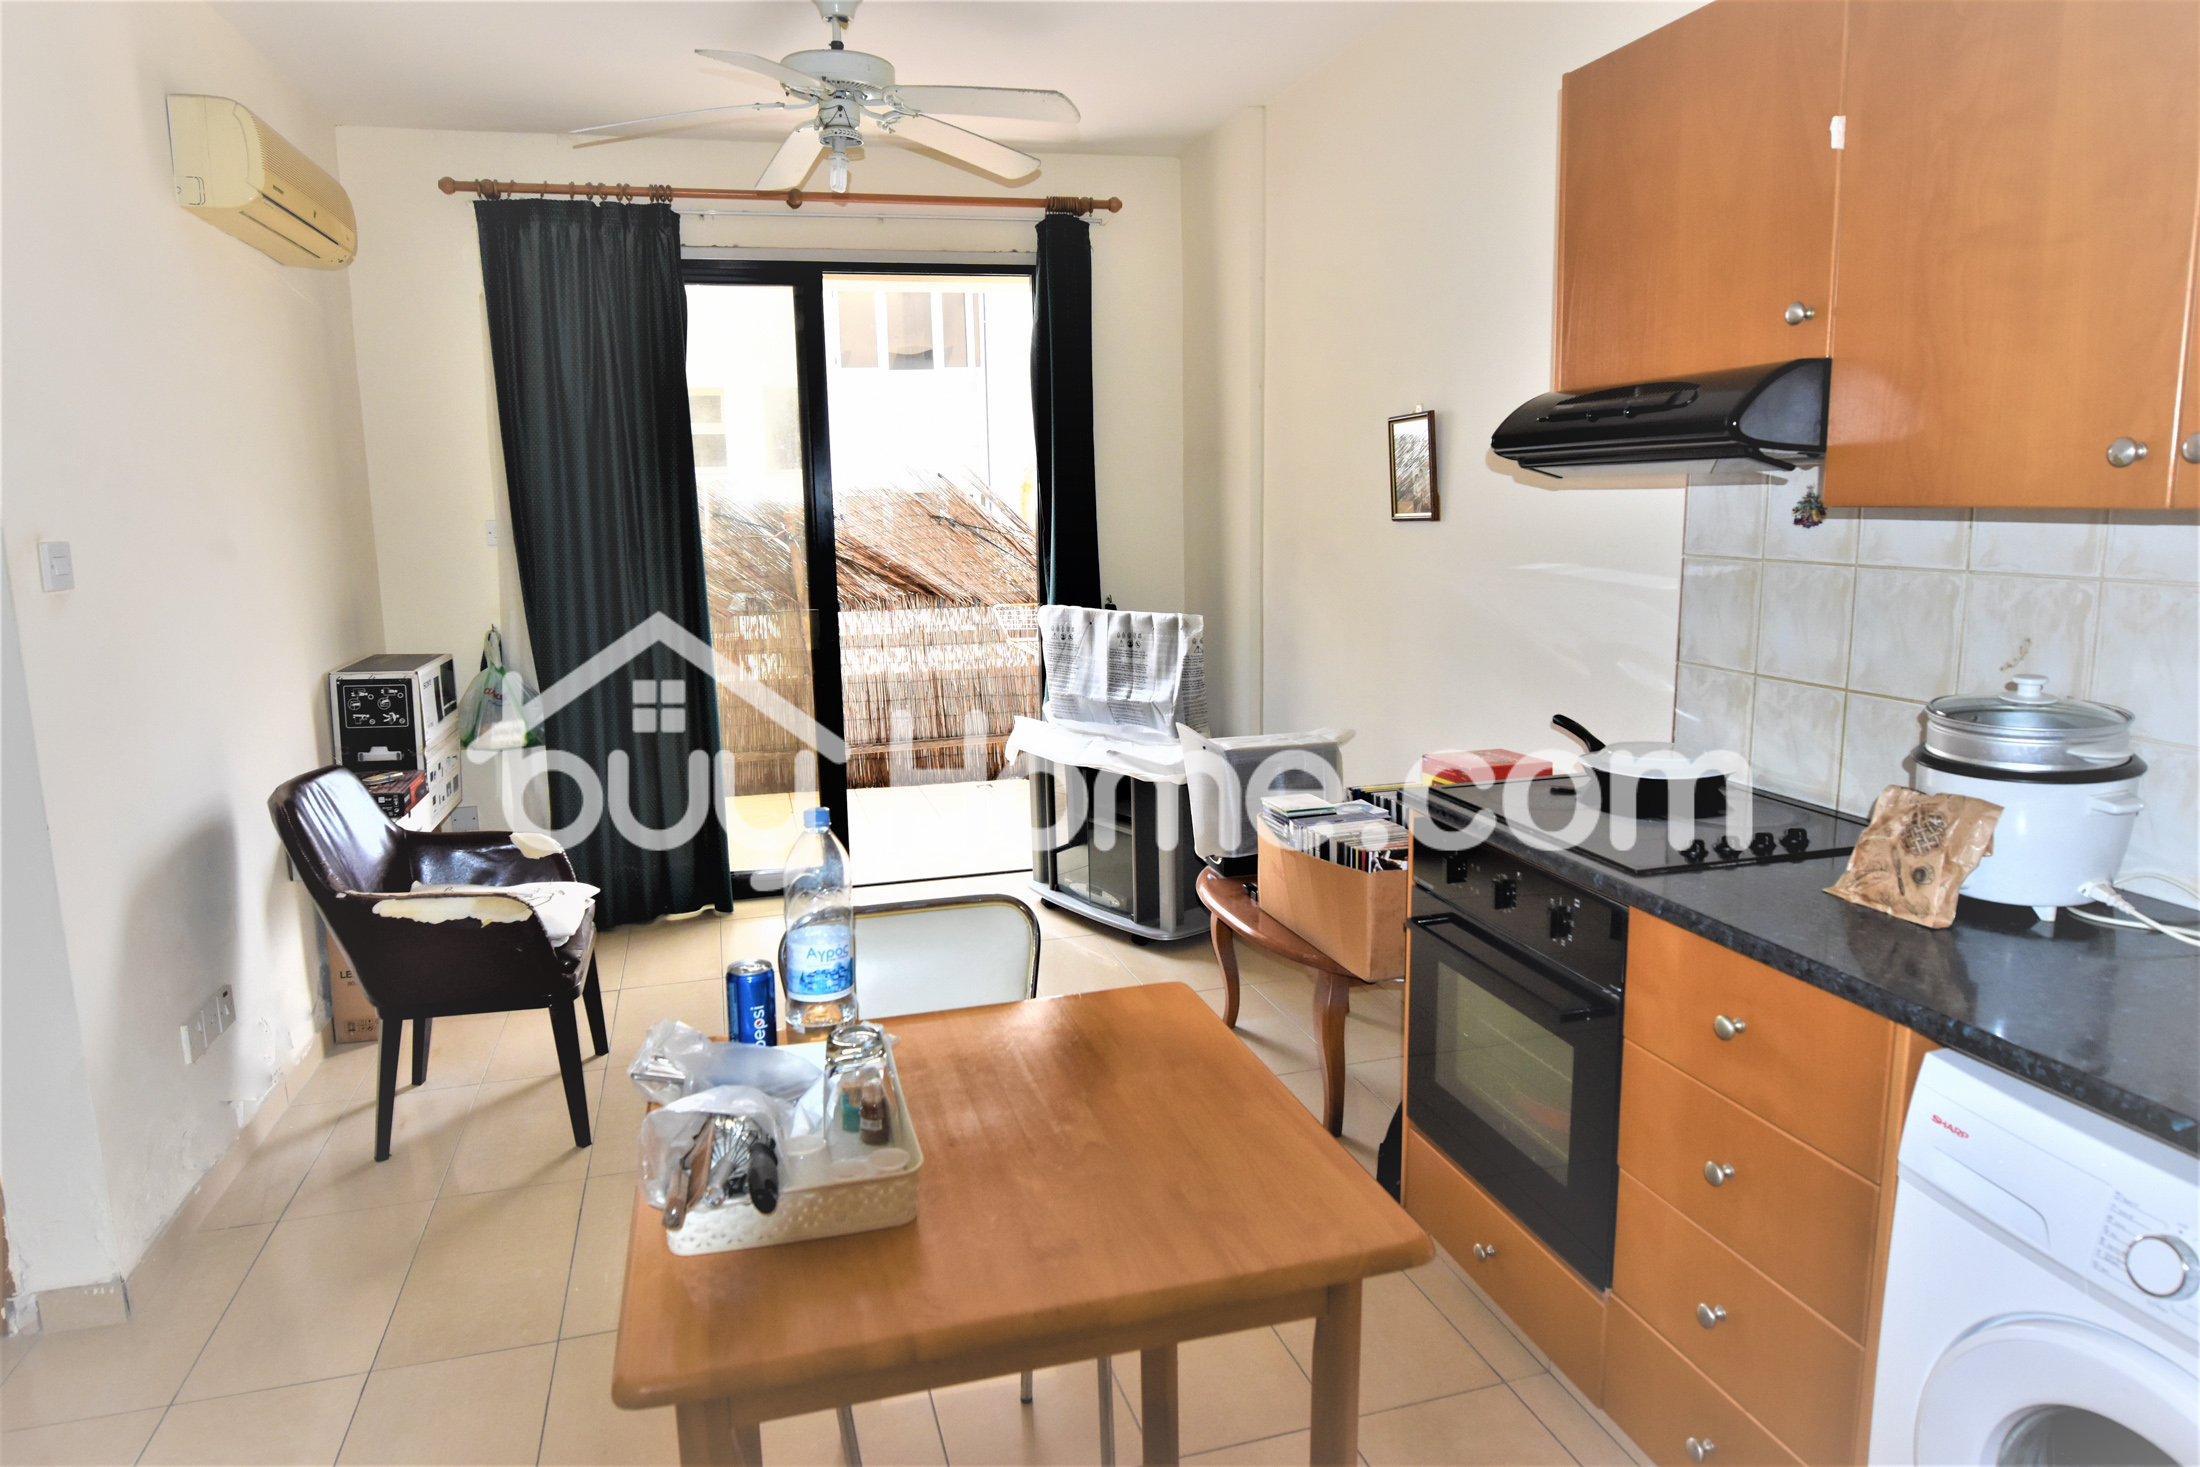 1 Bedroom Apartment | BuyHome